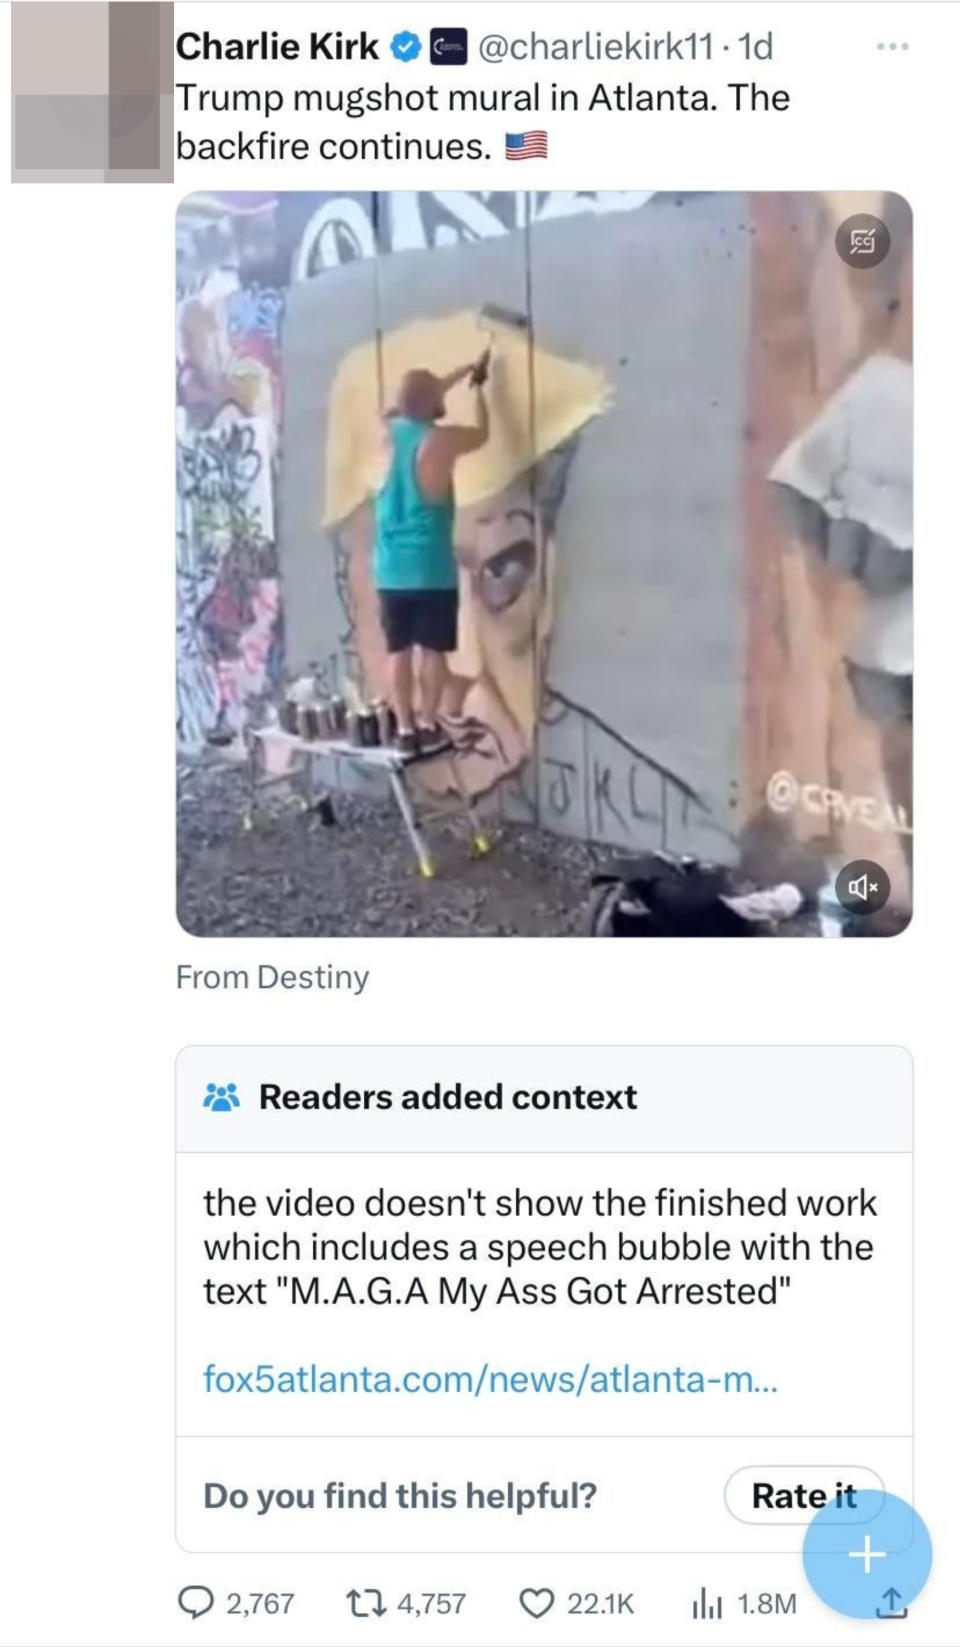 "the video doesn't show the finished work..."